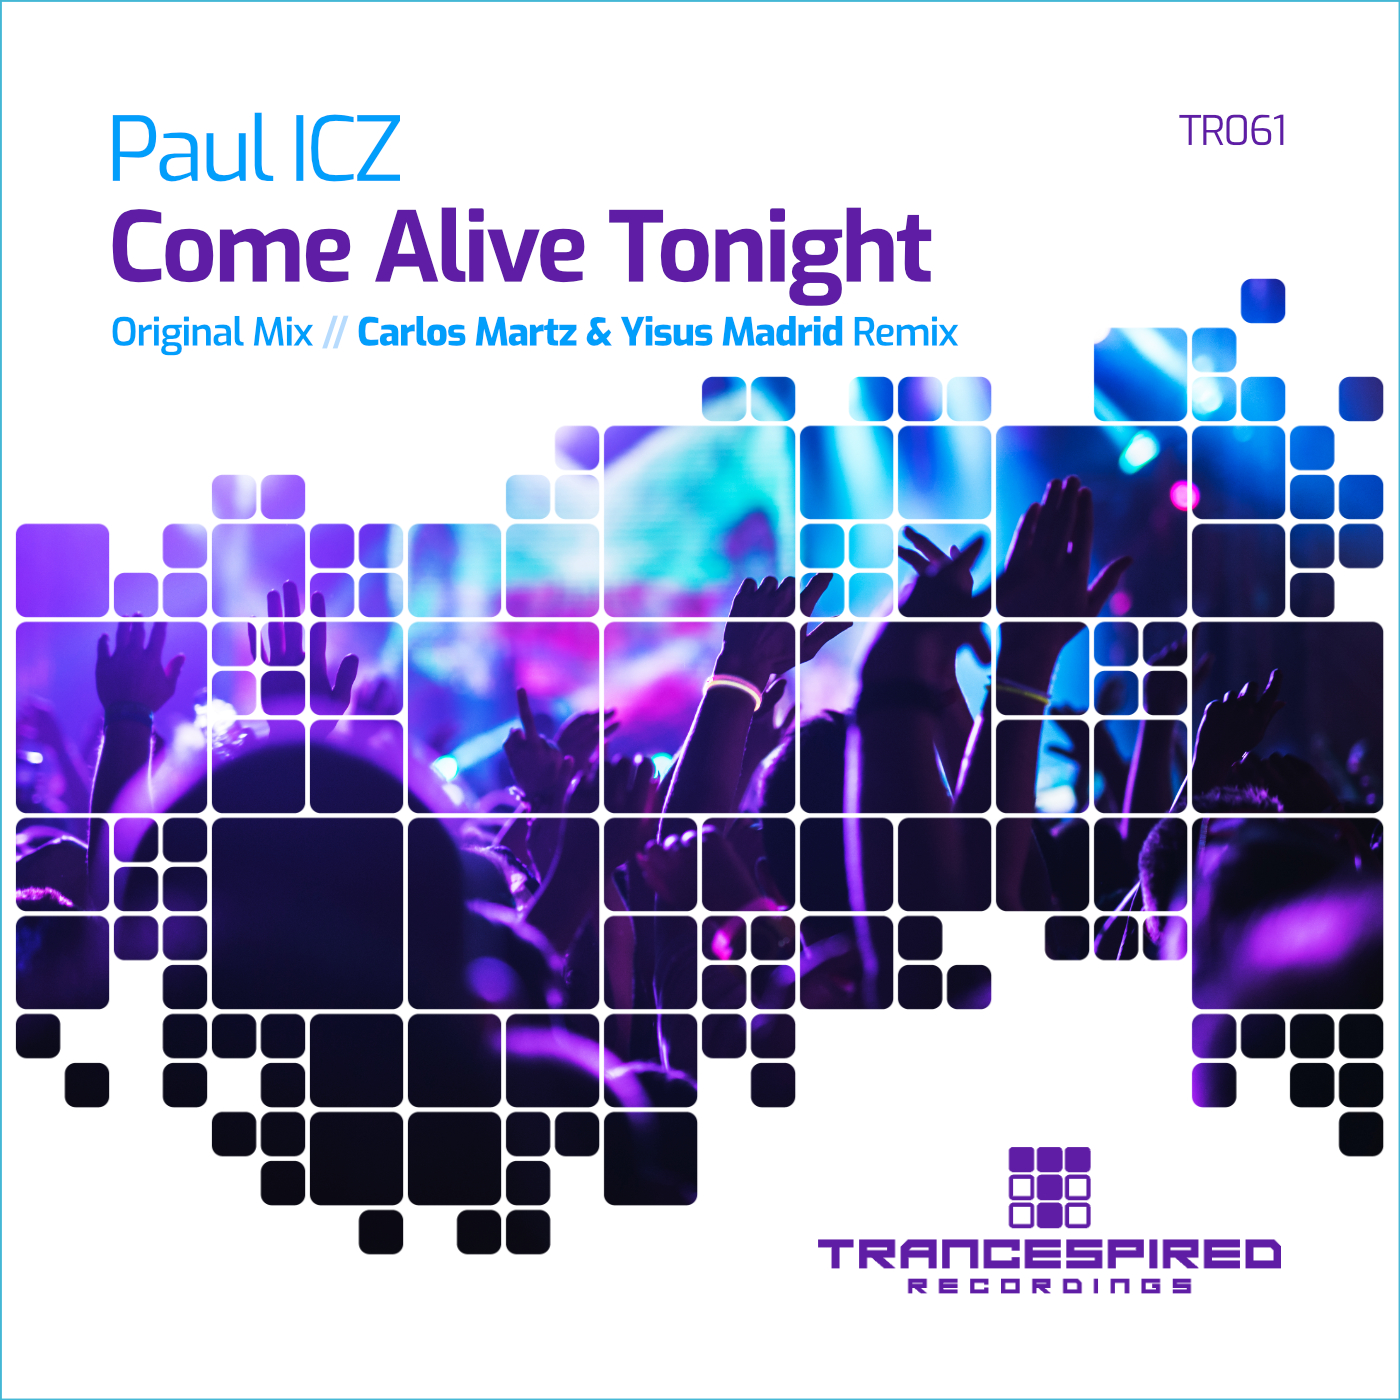 Paul ICZ presents Come Alive Tonight on Trancespired Recordings